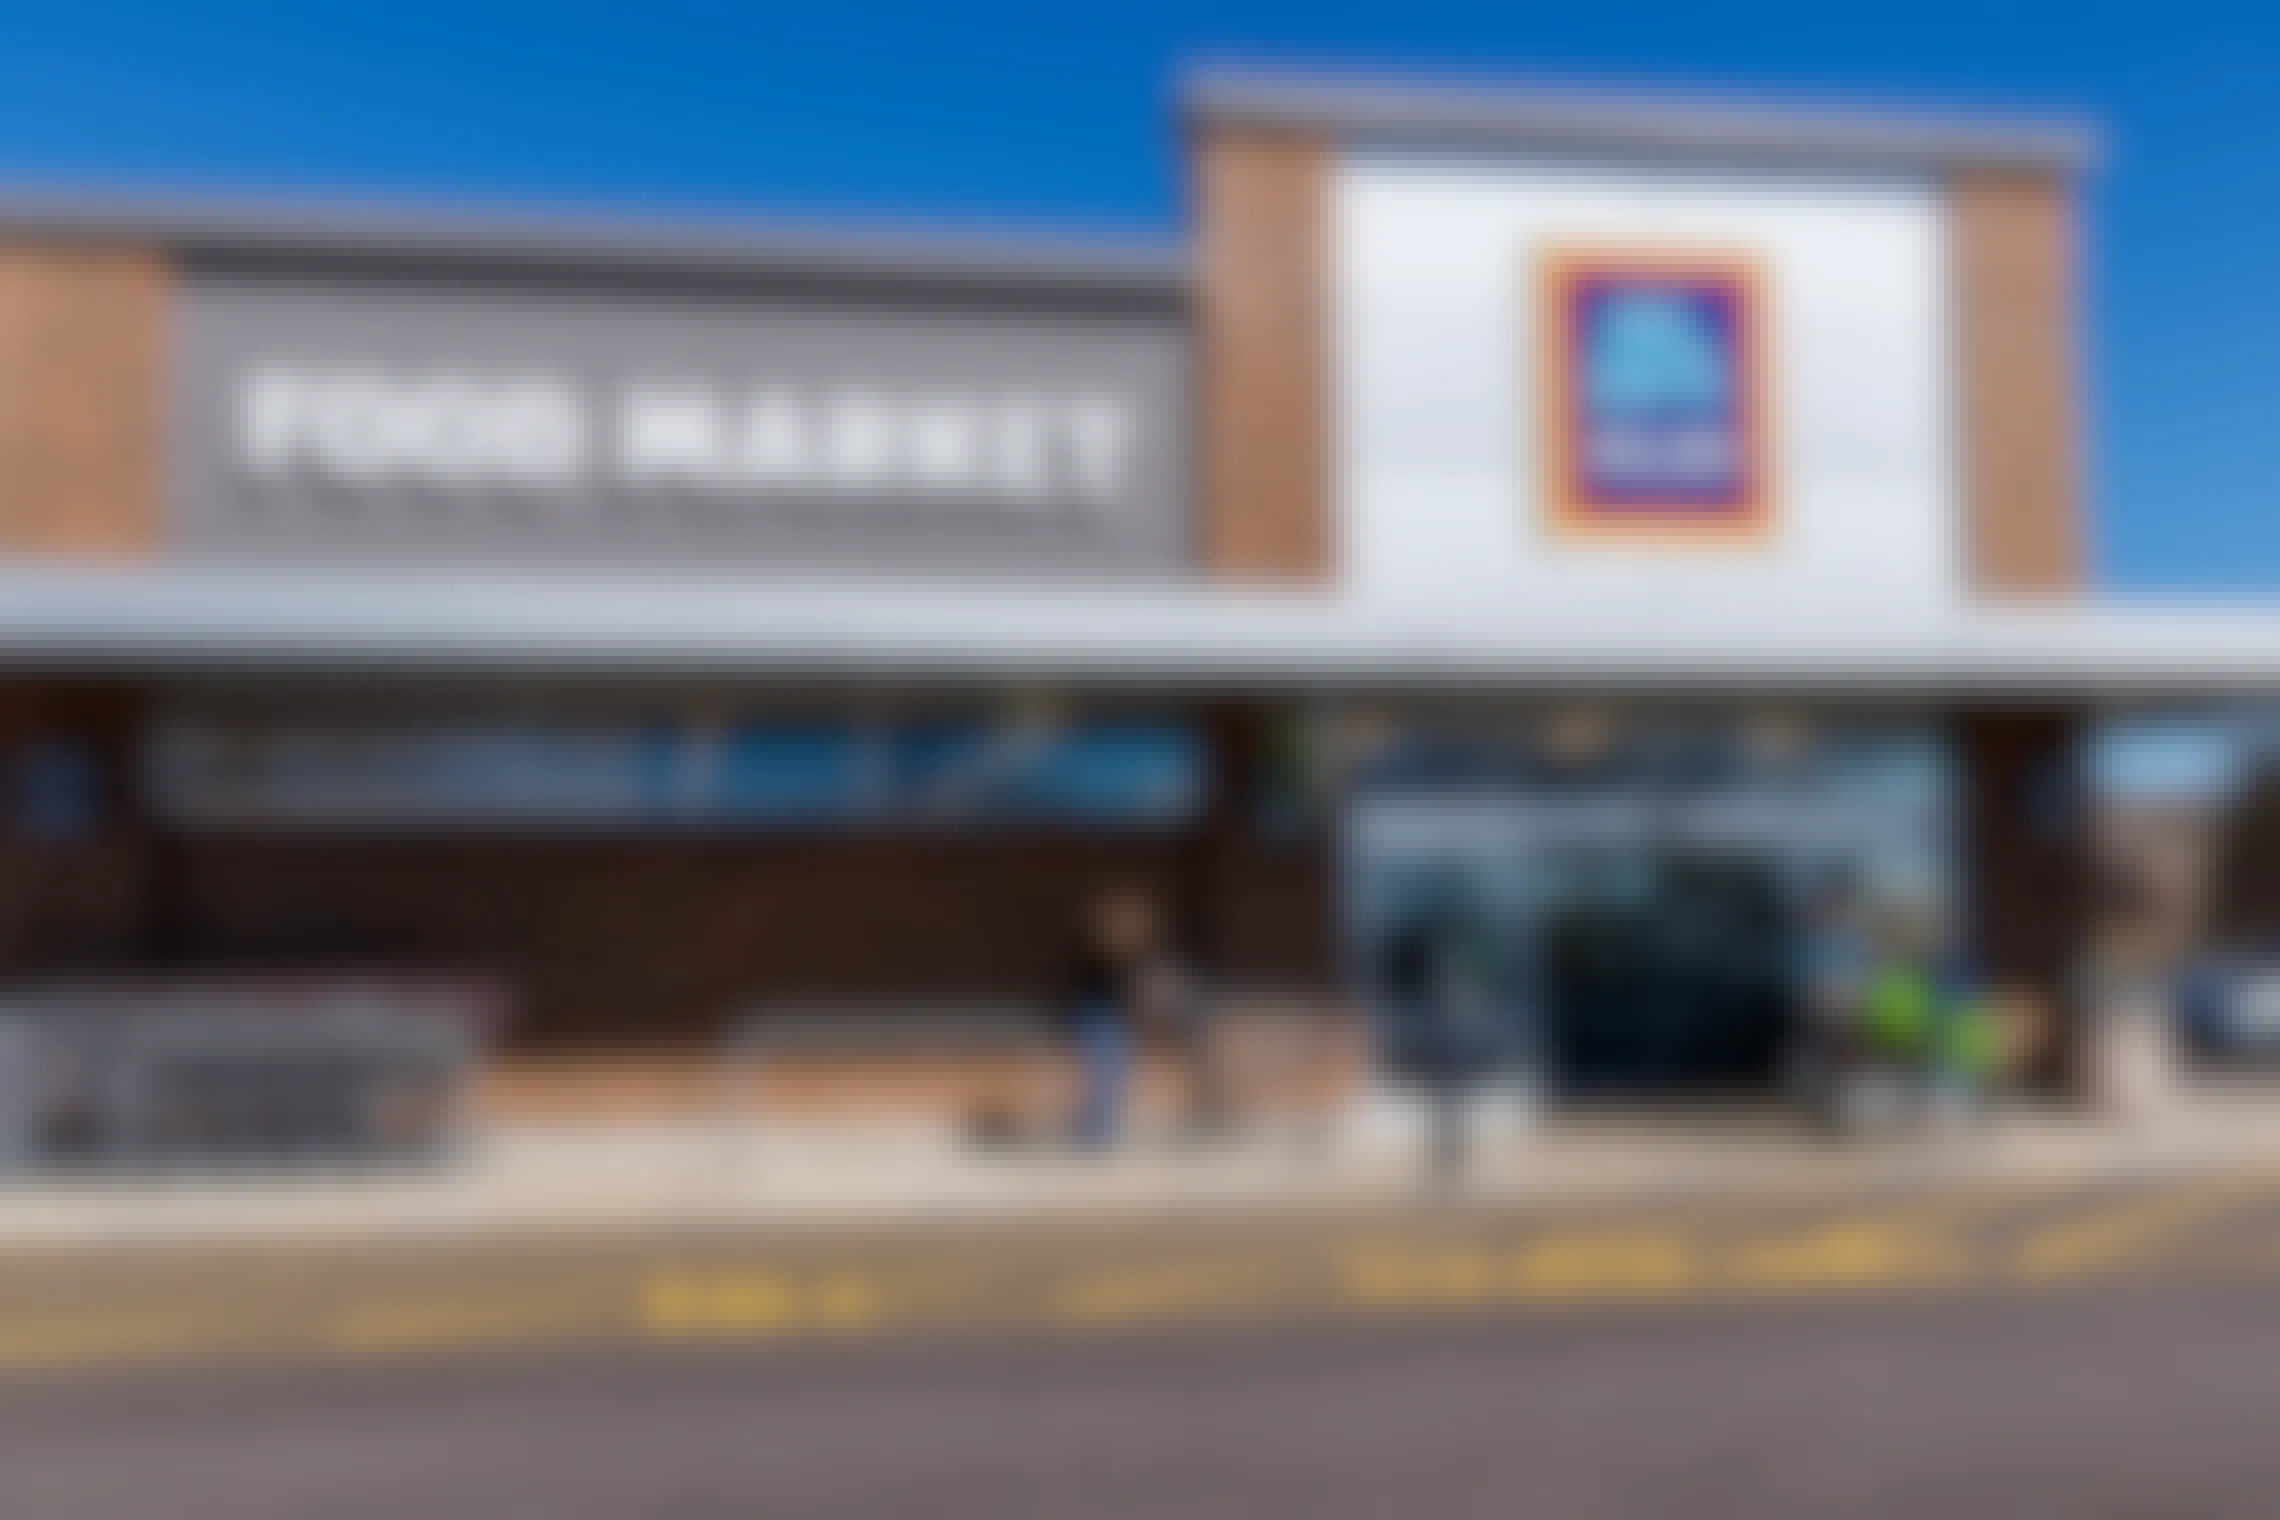 70 New ALDI Stores Are Coming by the End of 2020